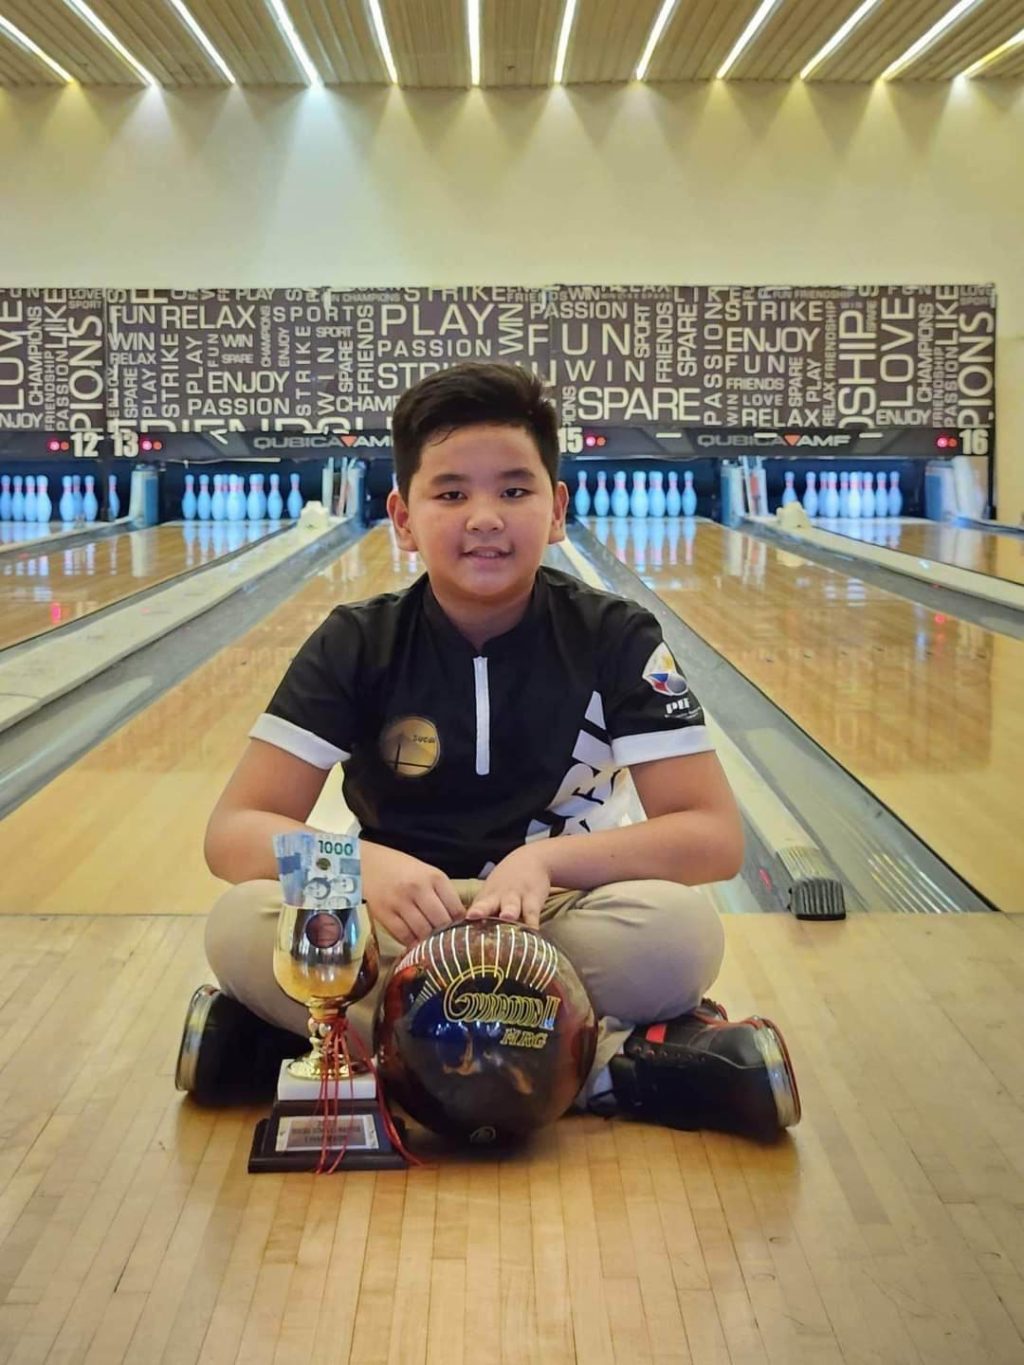 Twelve-year-old Michael John Villa, who beat adult bowlers in the Sugbu Singles Classic, an open bowling tournament, is seen as the ‘next bowling prodigy’ of the Sugbu Youth Program. | Contributed photo 